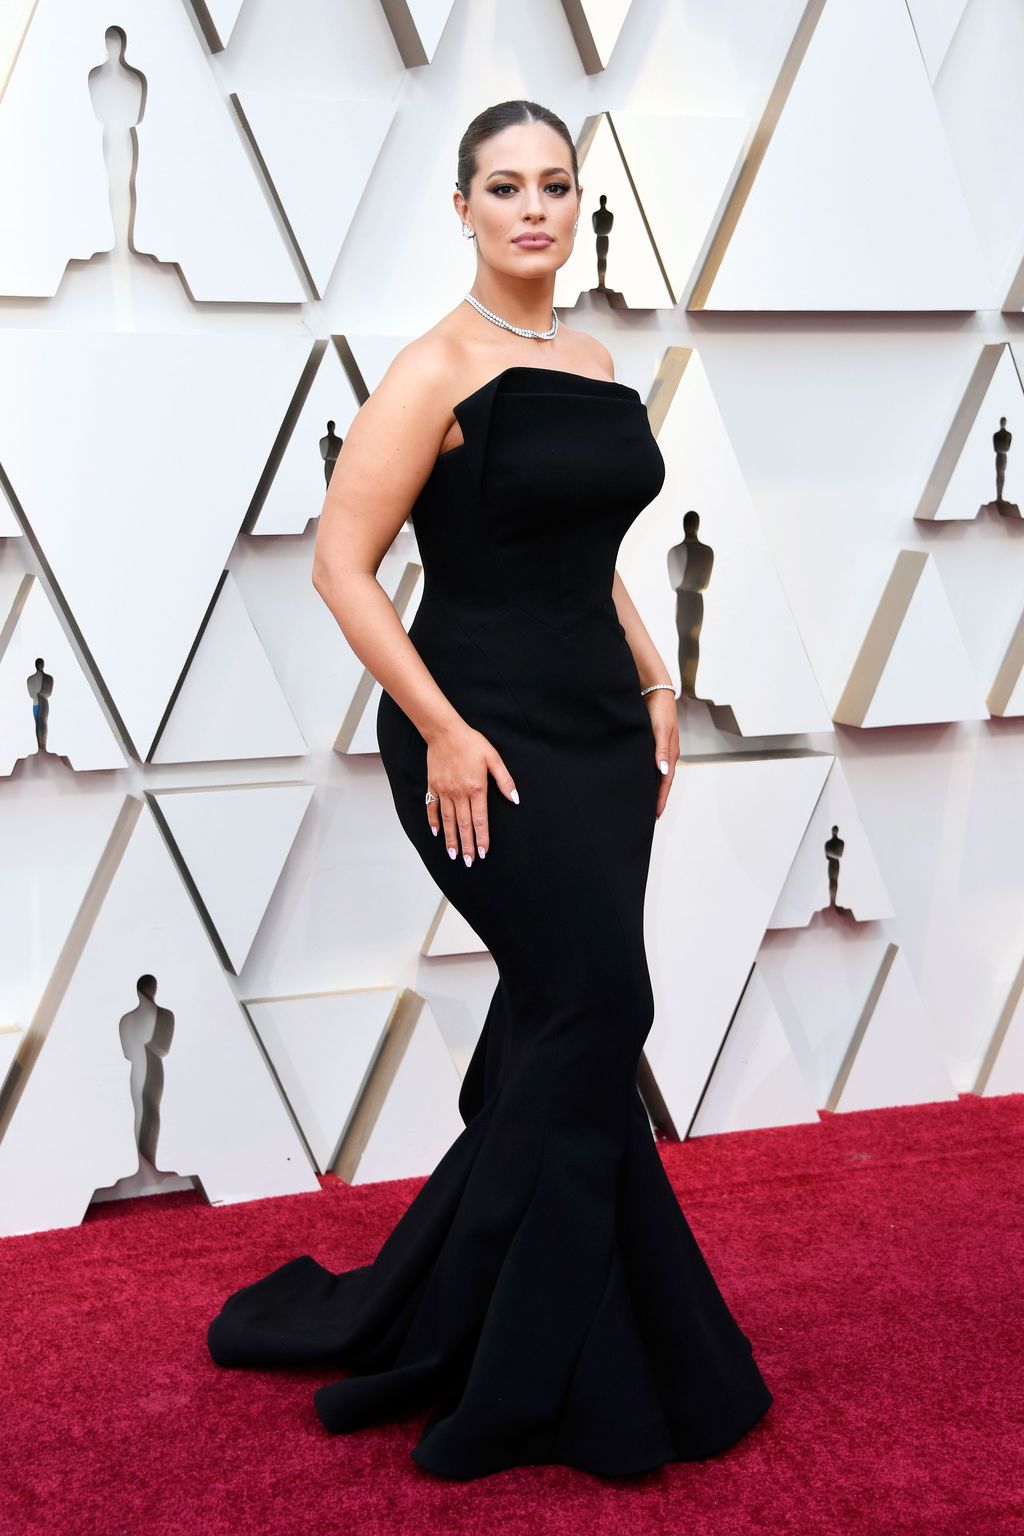 HOLLYWOOD, CALIFORNIA - FEBRUARY 24: Ashley Graham attends the 91st Annual Academy Awards at Hollywood and Highland on February 24, 2019 in Hollywood, California. (Photo by Frazer Harrison/Getty Images)